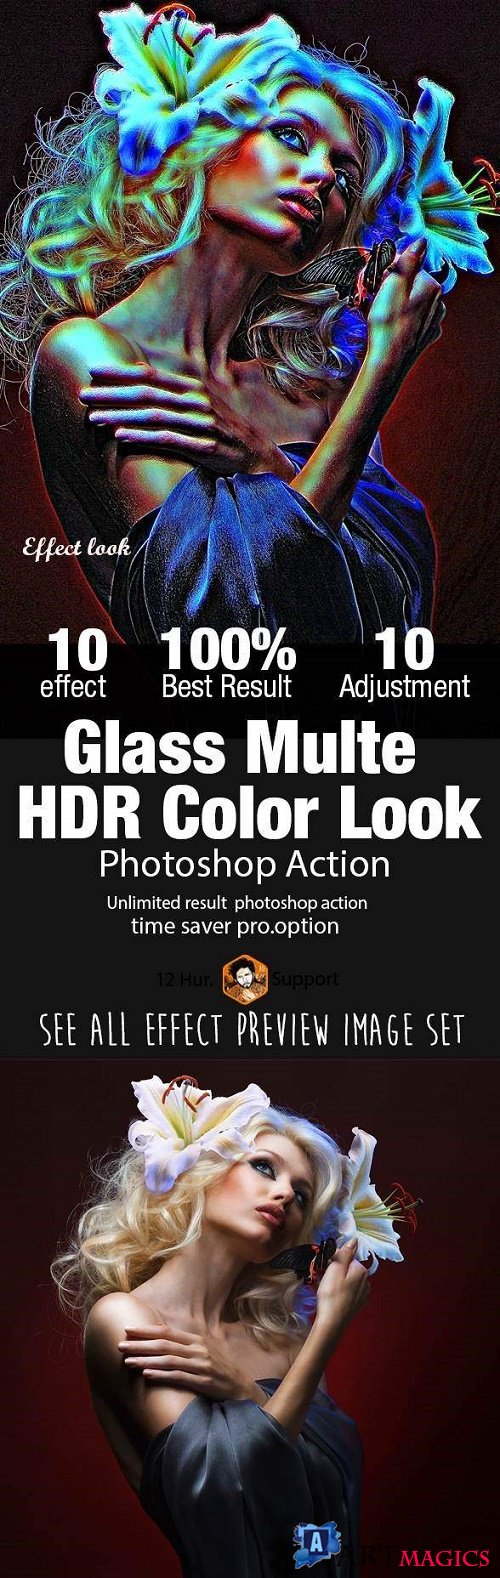 Glass Multi HDR Color Look 21560434